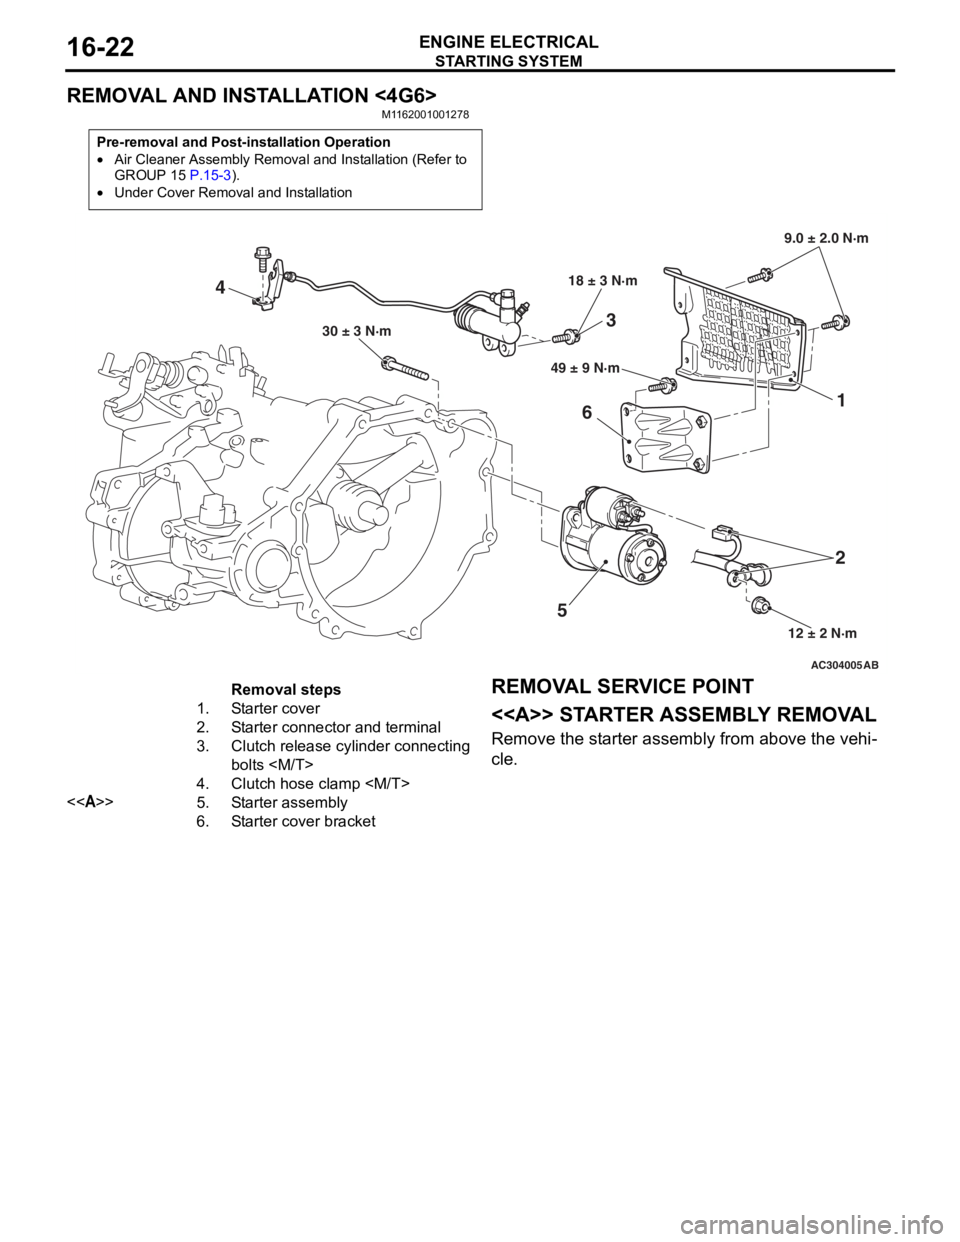 MITSUBISHI LANCER 2006  Workshop Manual 
STARTING SYSTEM
ENGINE ELECTRICAL16-22
REMOVAL AND INSTALLATION <4G6>
M1162001001278
Pre-removal and Post-installation Operation
•Air Cleaner Assembly Removal and Installation (Refer to 
GROUP 15 P